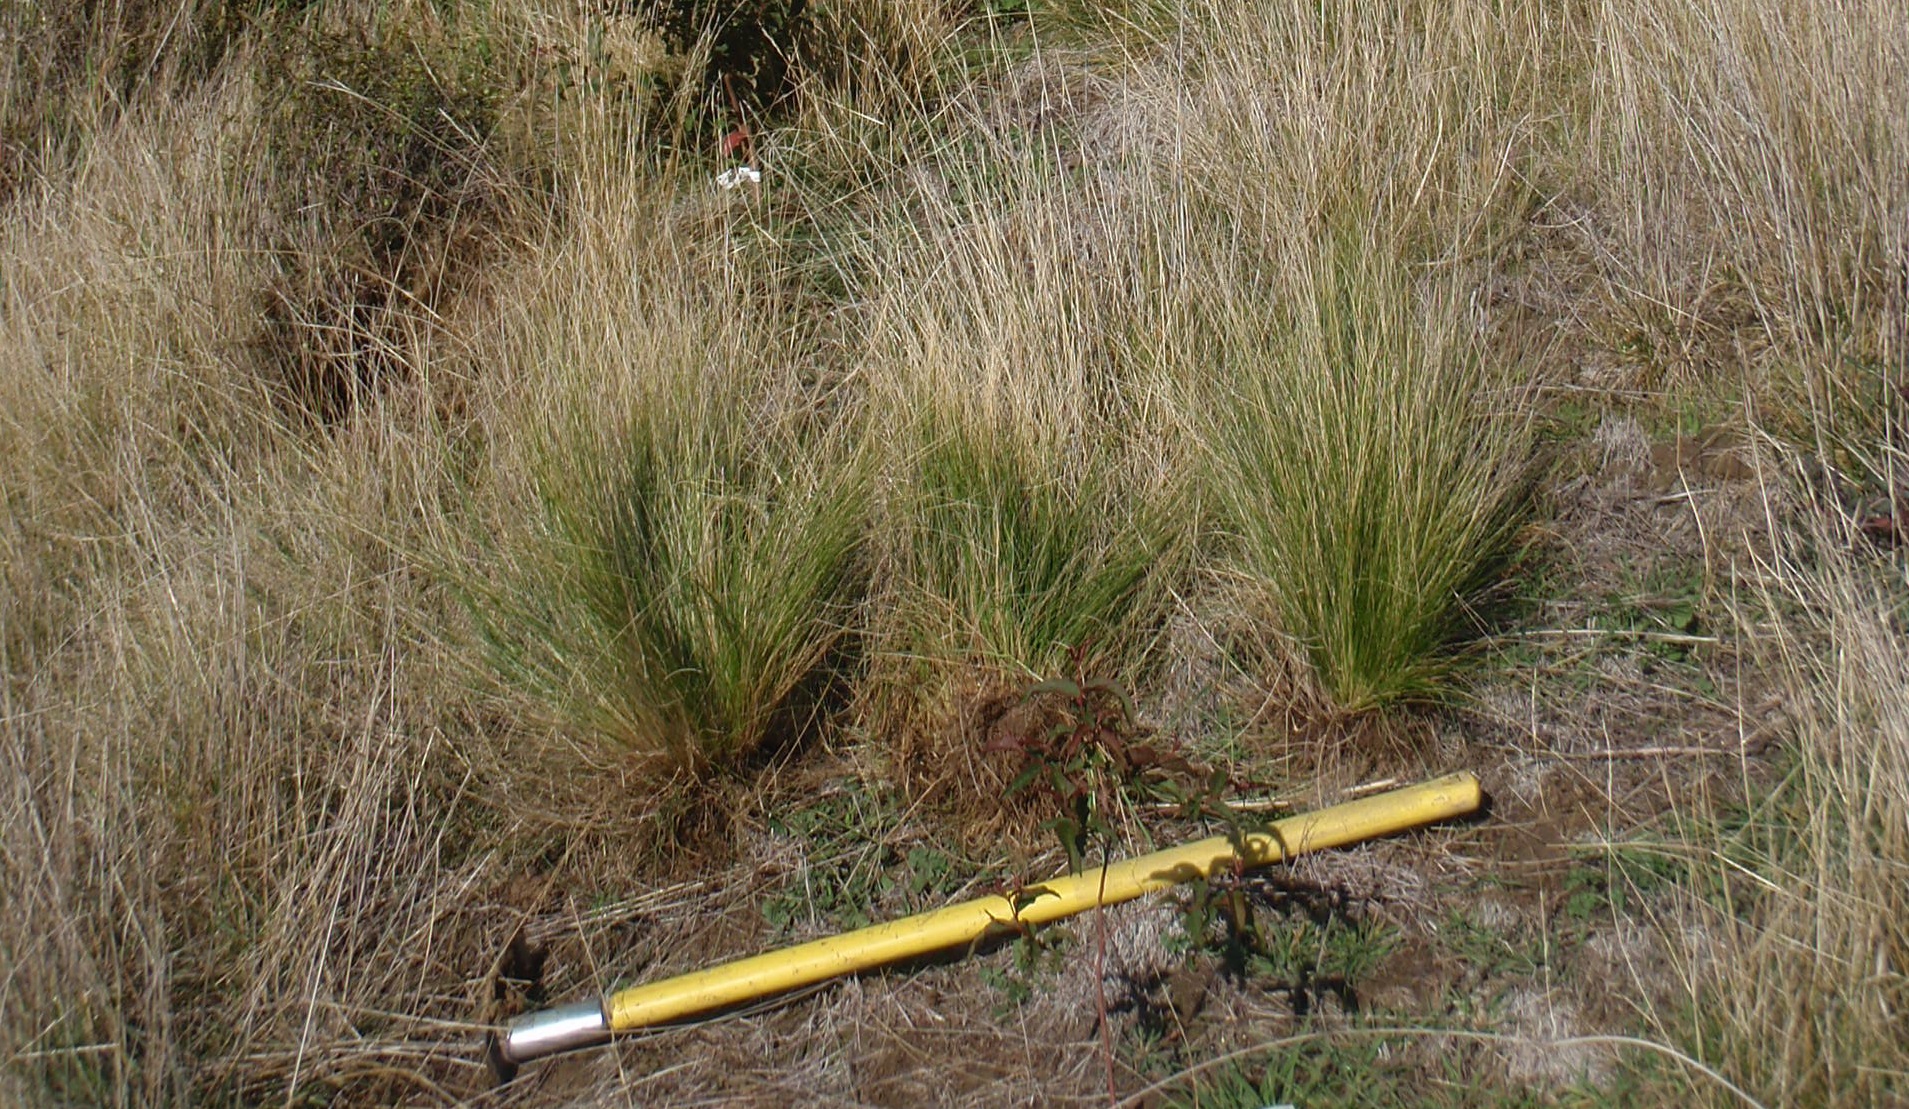 Young 'nest' of Nassella Tussock plants